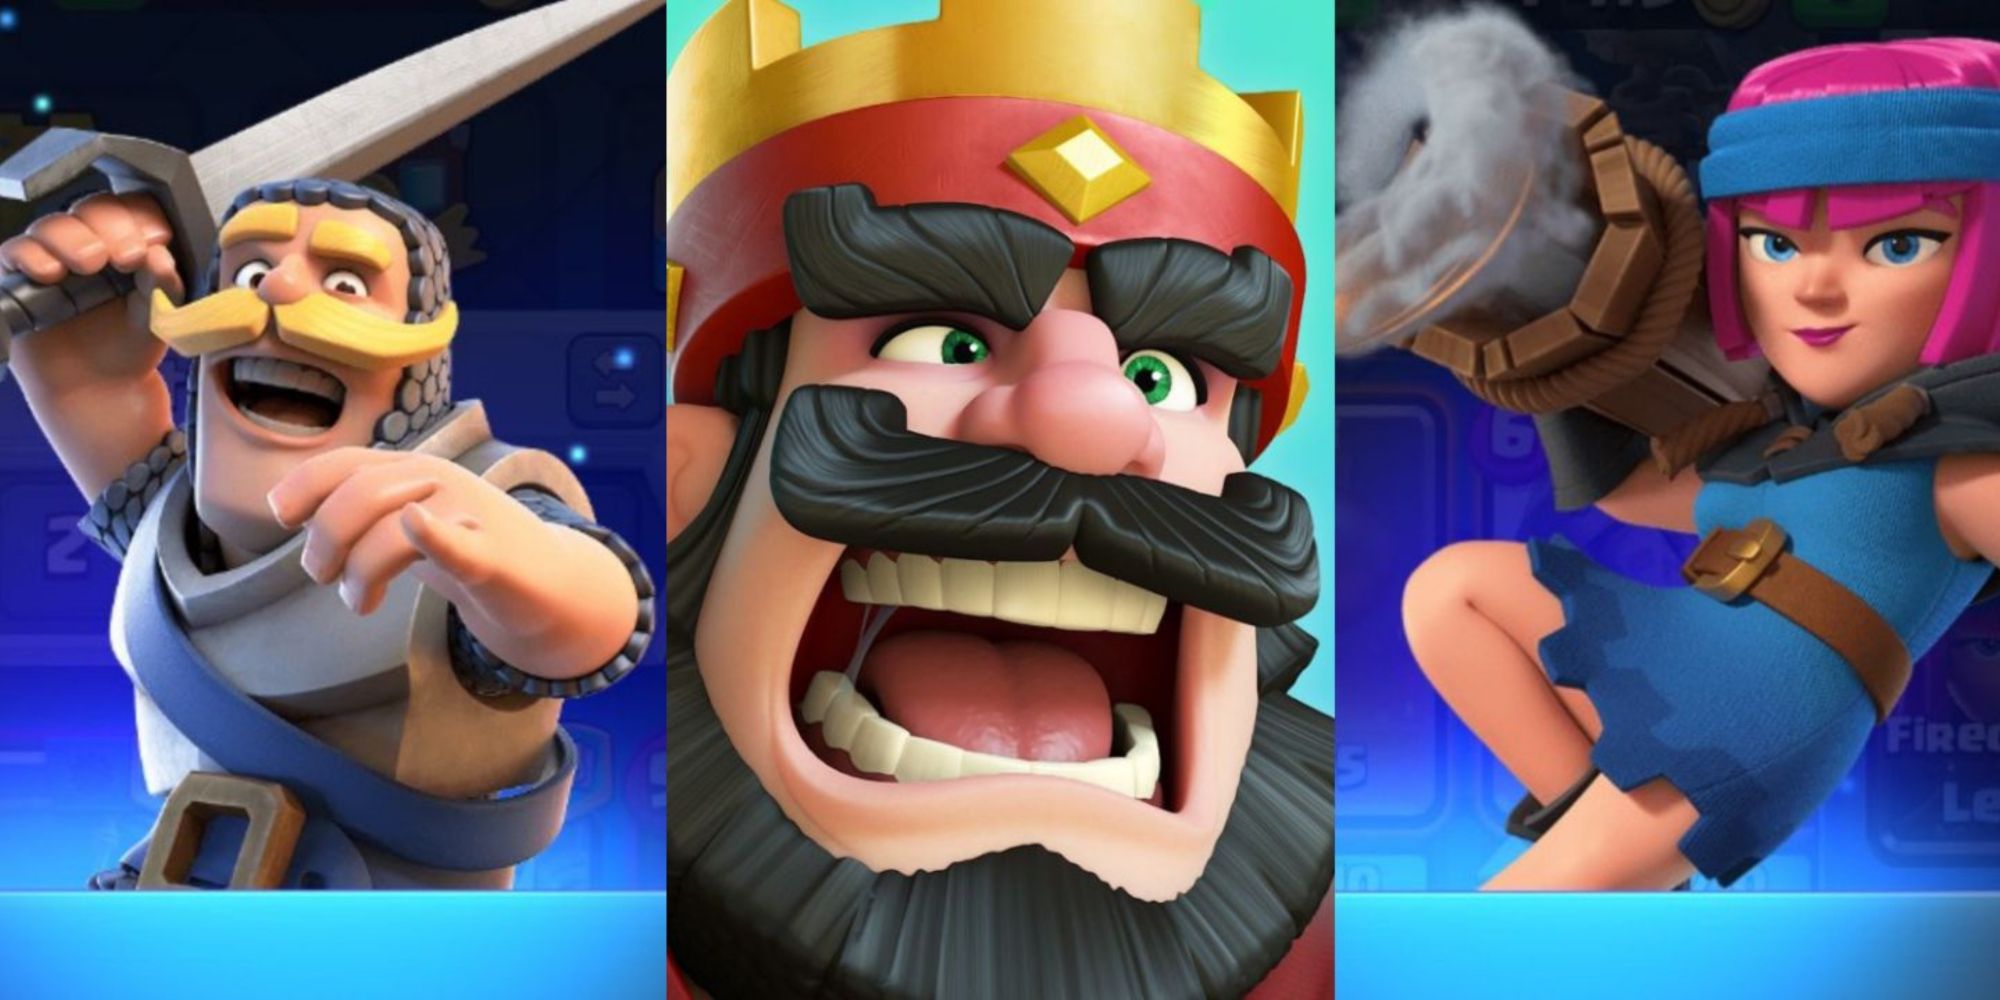 Clash Royale Common Card Collage Featuring the Knight, King, and Firecracker